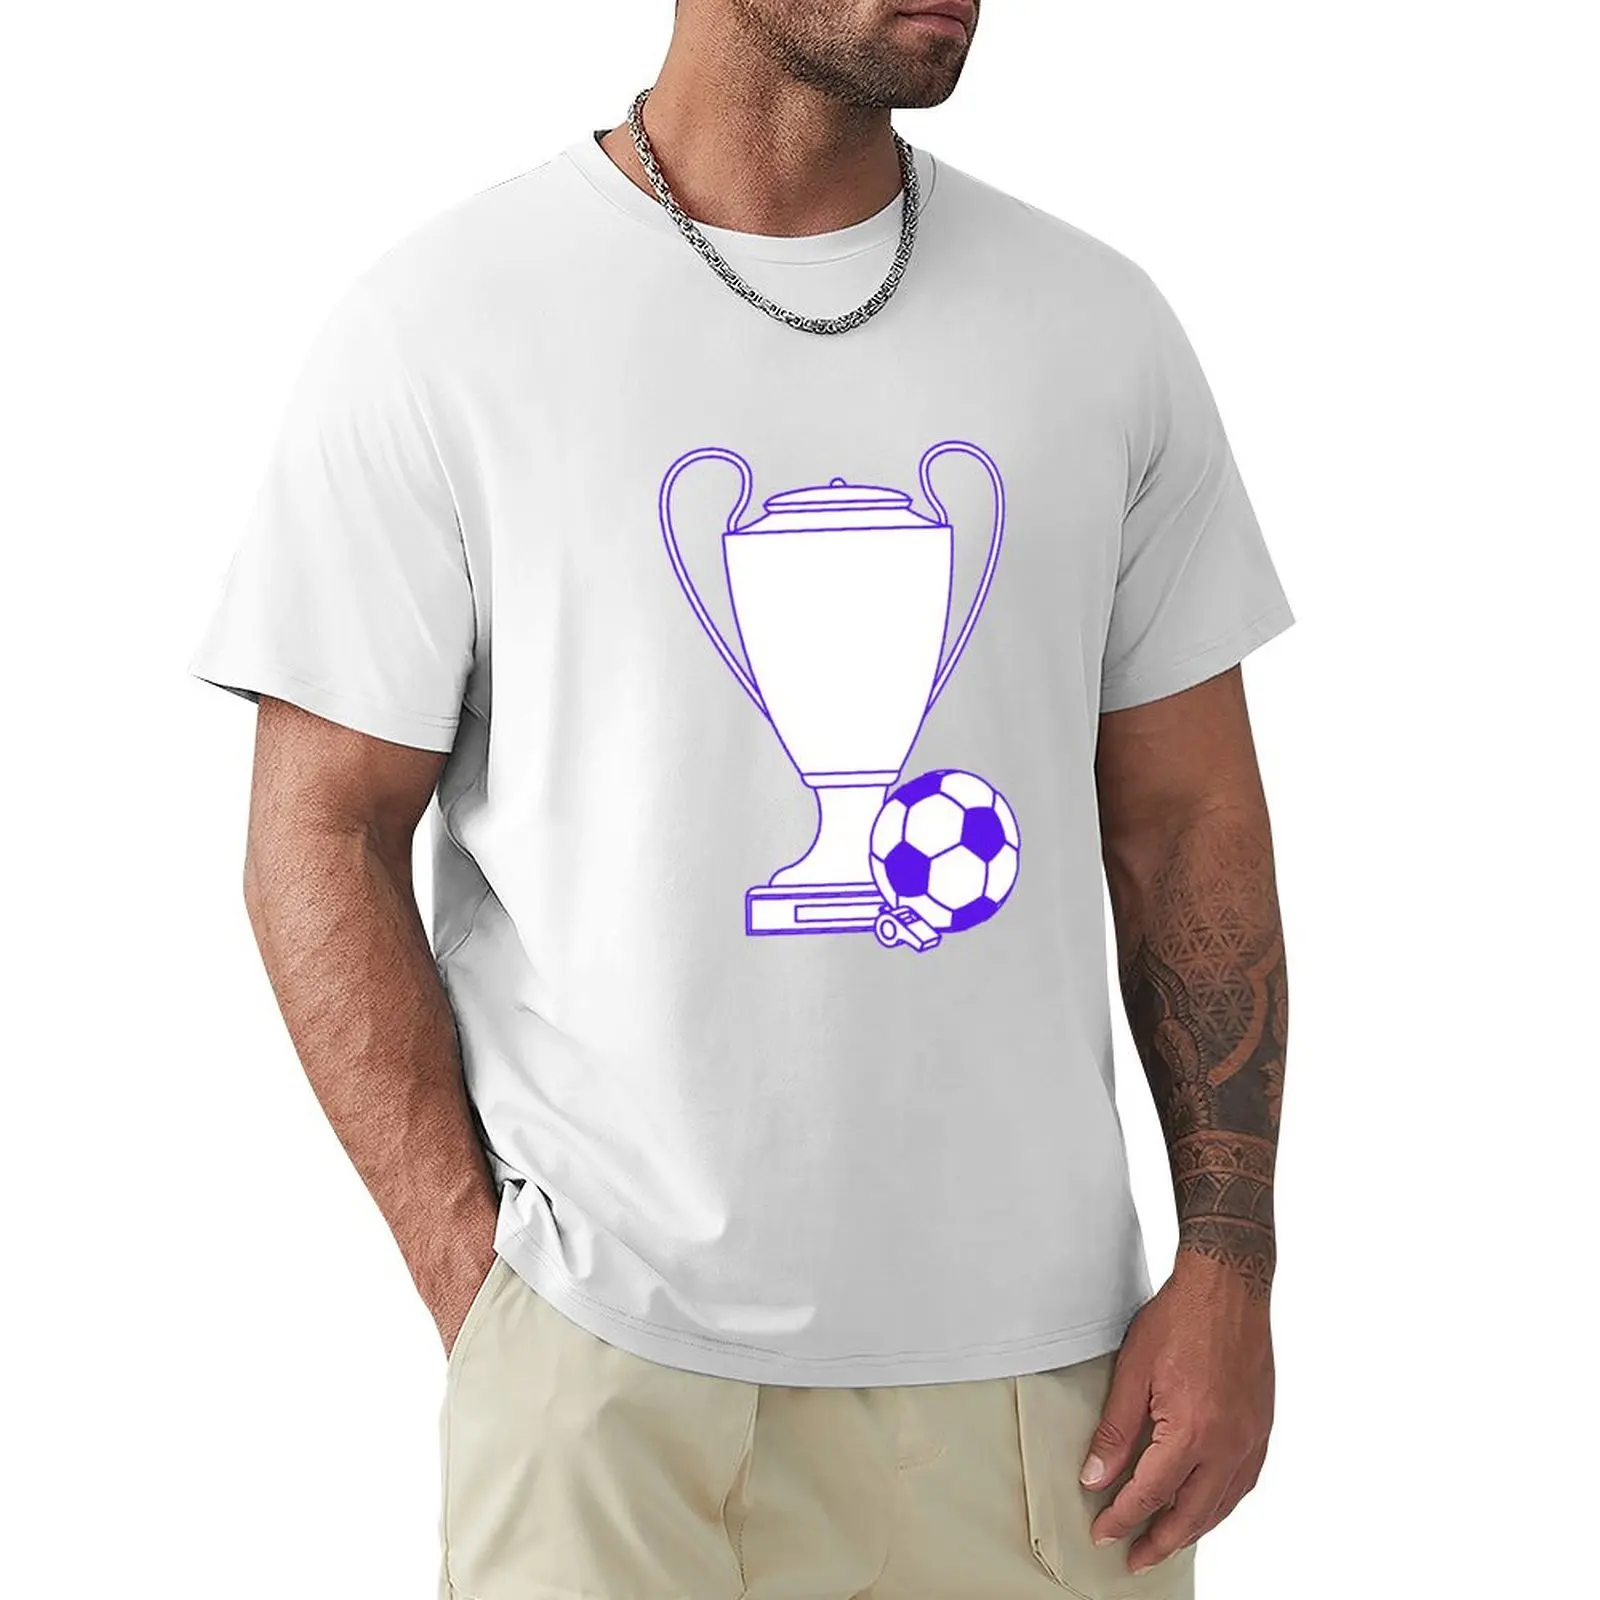 

The Trophy Victory Vibes Celebrating Football Trophes T-shirt quick-drying customs design your own oversized t shirt men